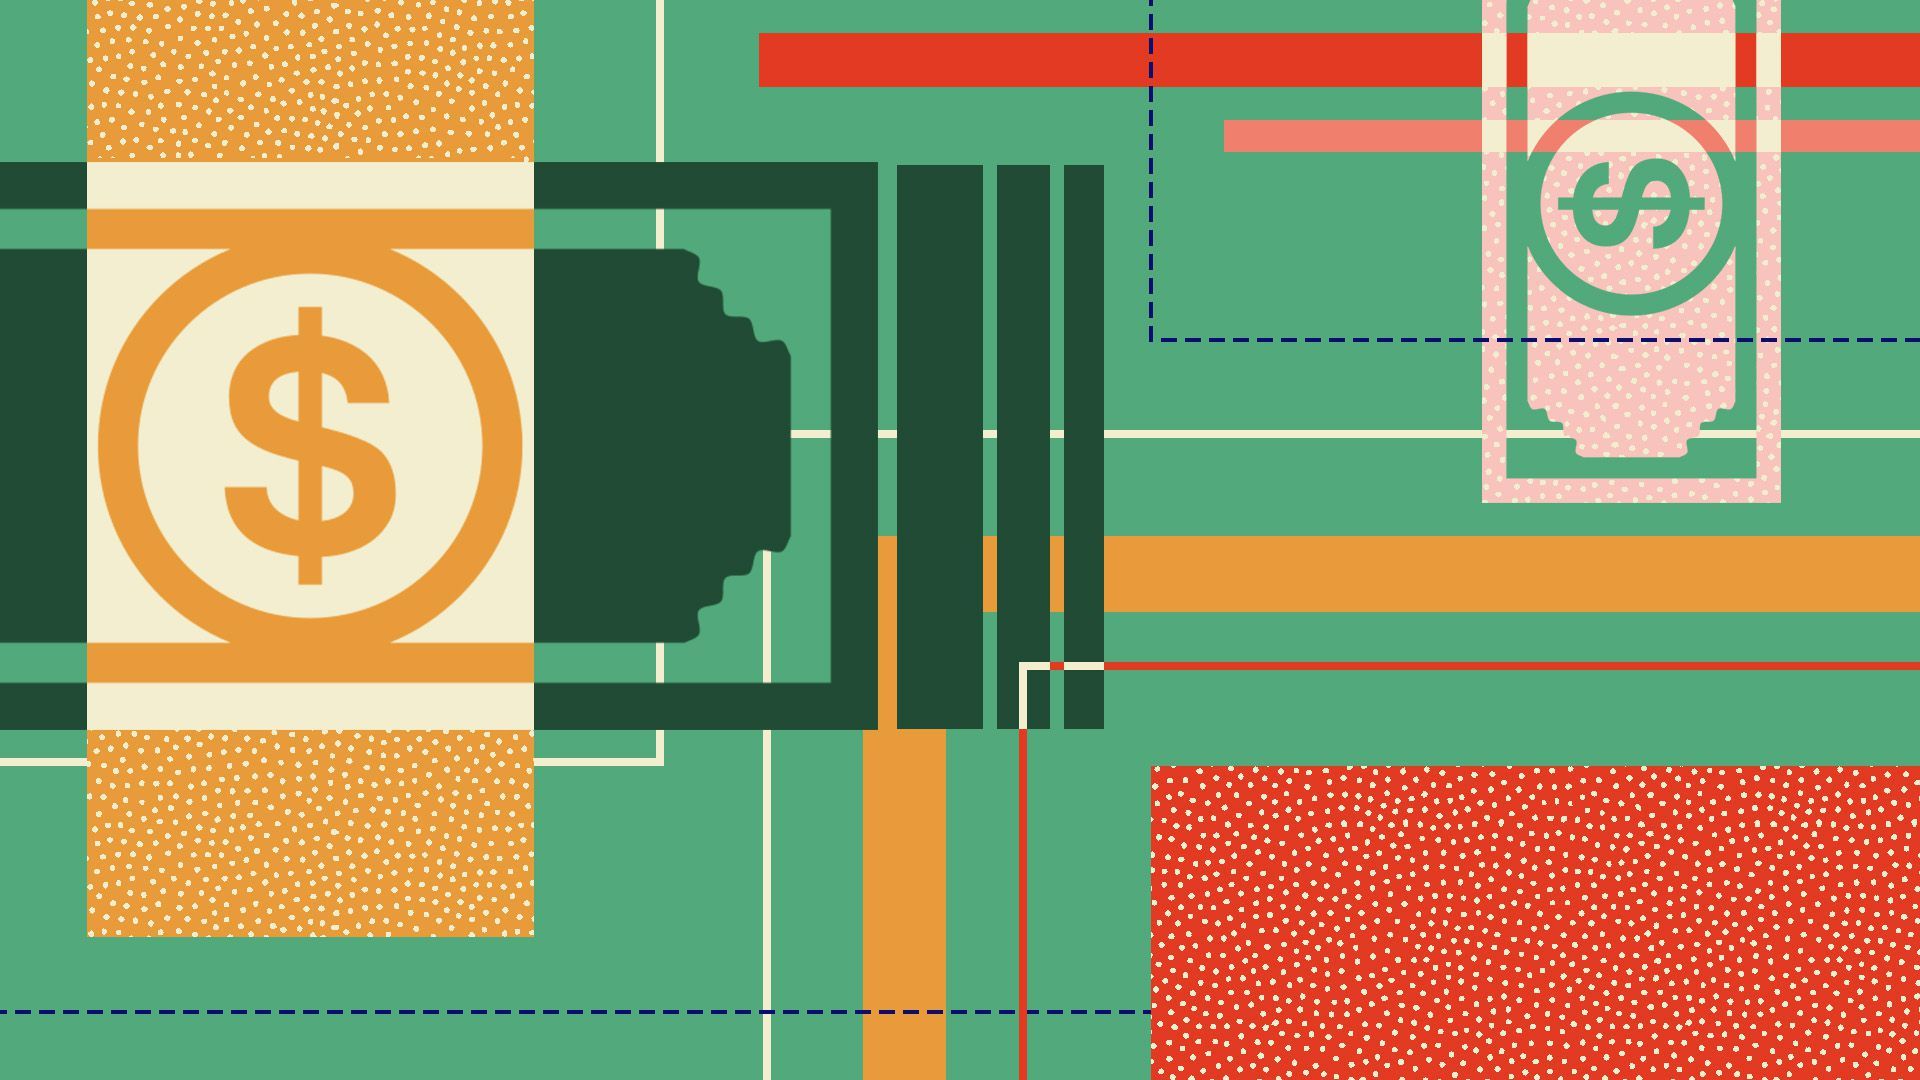 Illustration of abstract shapes and dollar bills.